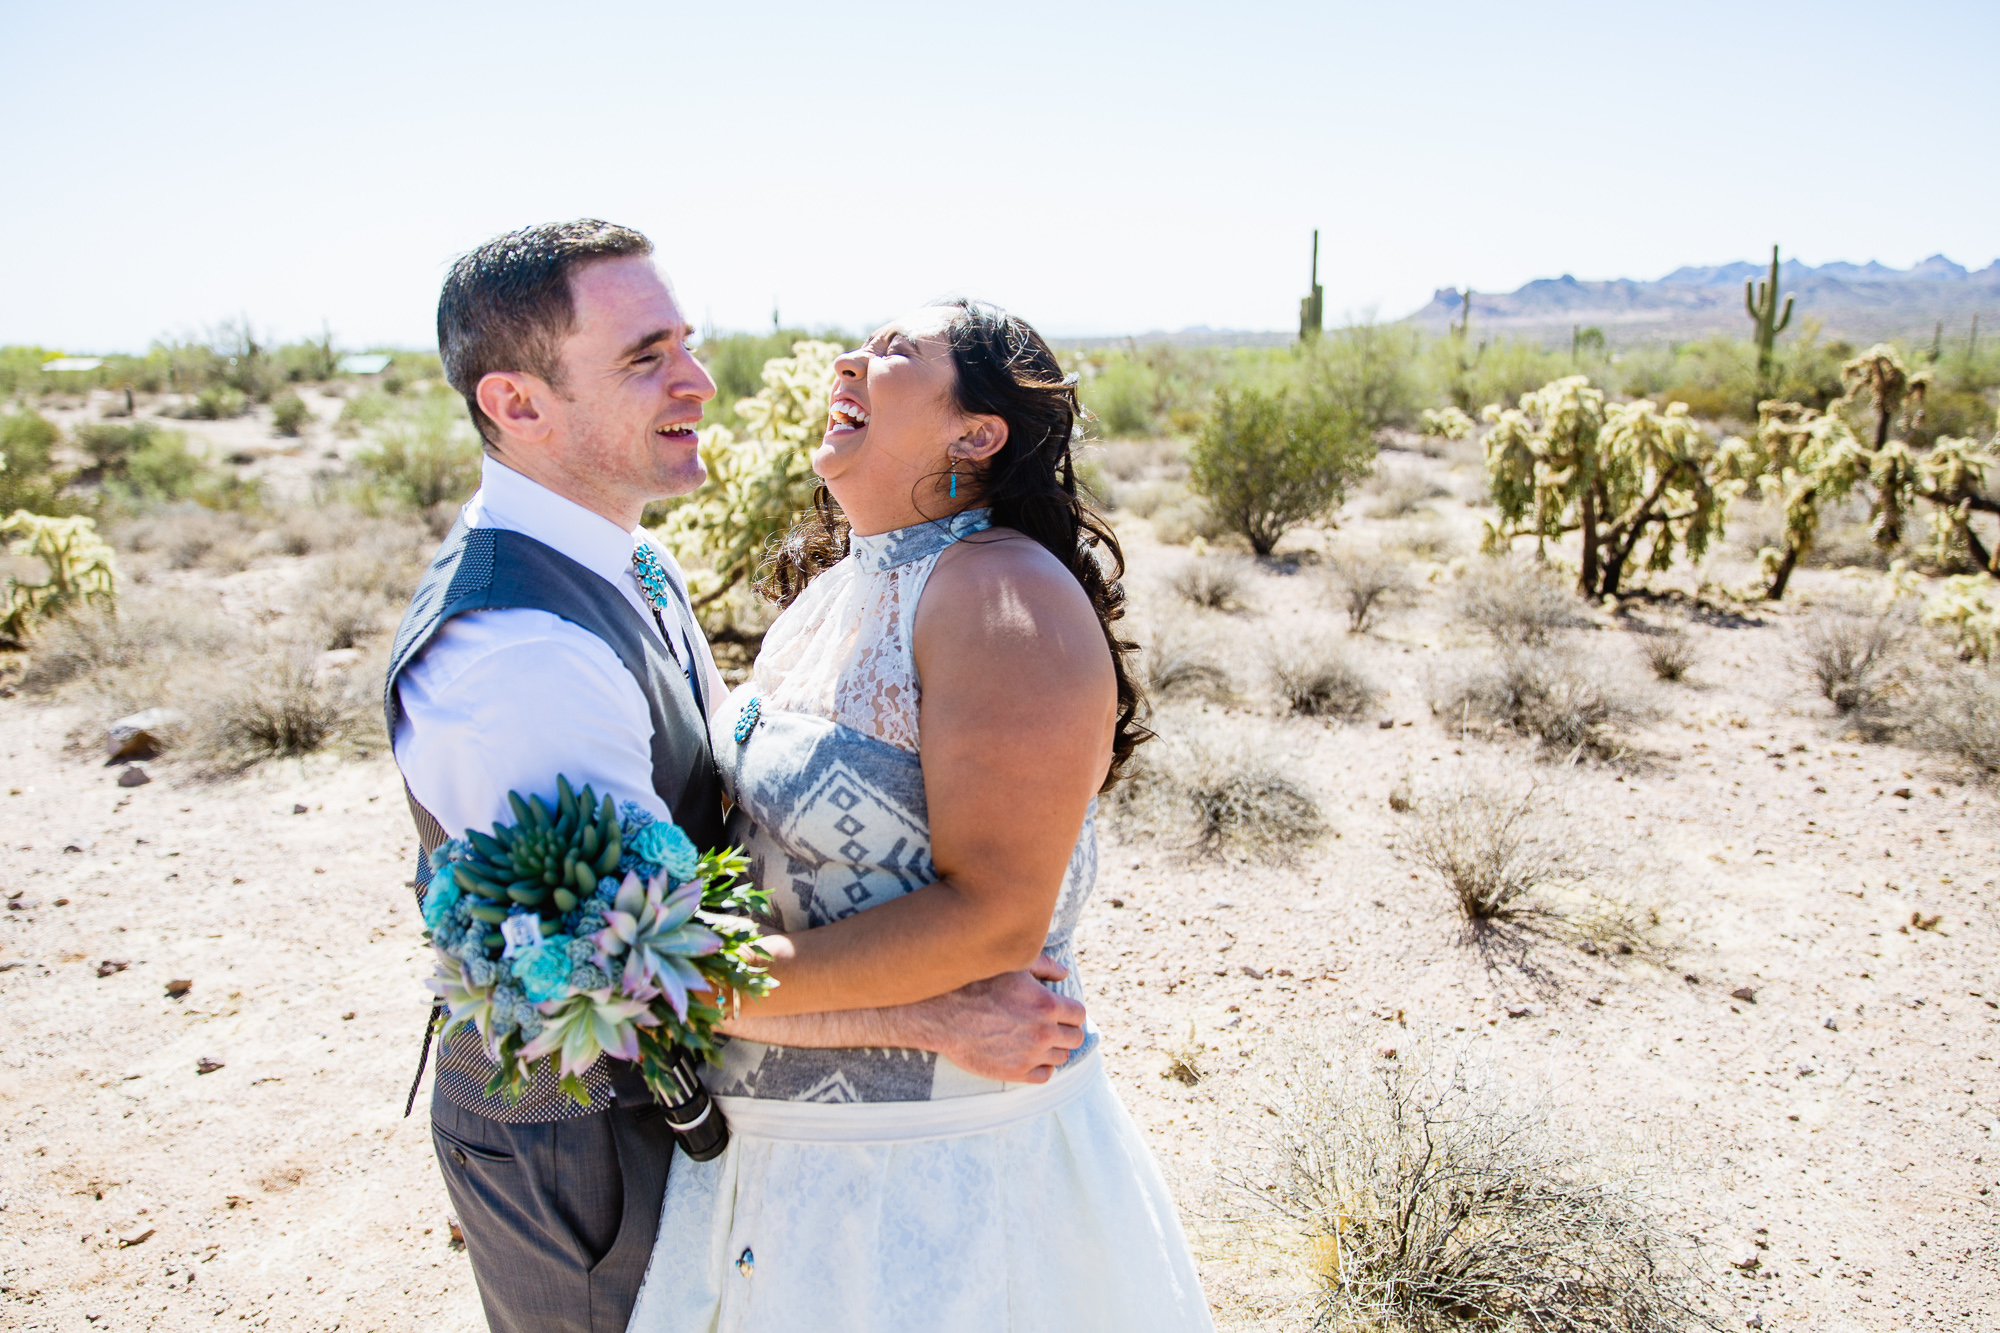 Bride and groom sharing a laugh in turquoise and grey wedding attire in the Arizona desert at Lost Dutchman State Park by wedding photographers PMA Photography.